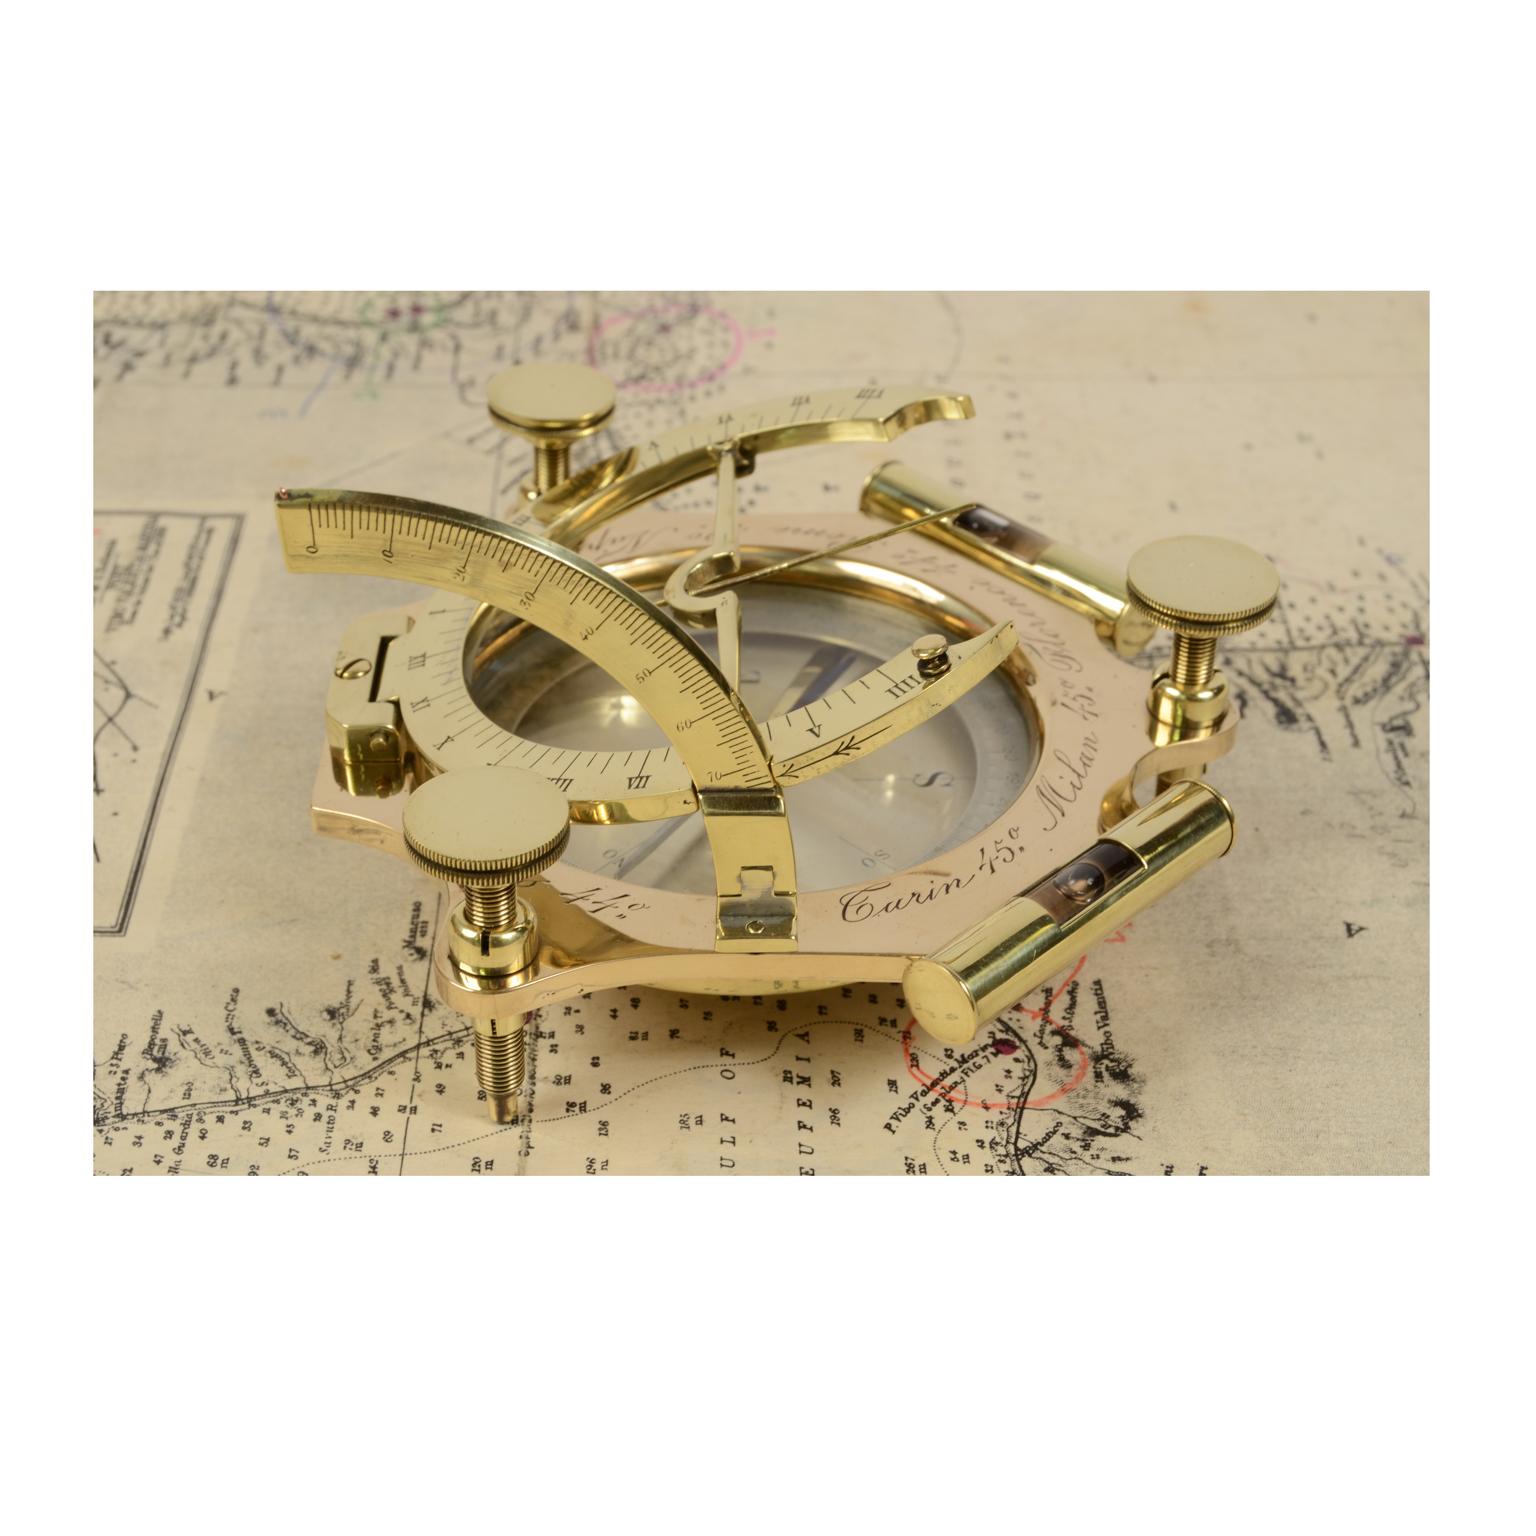 British Equinoctial Sundial Engraved Brass and Glass Time Measuring Instrument UK 1840